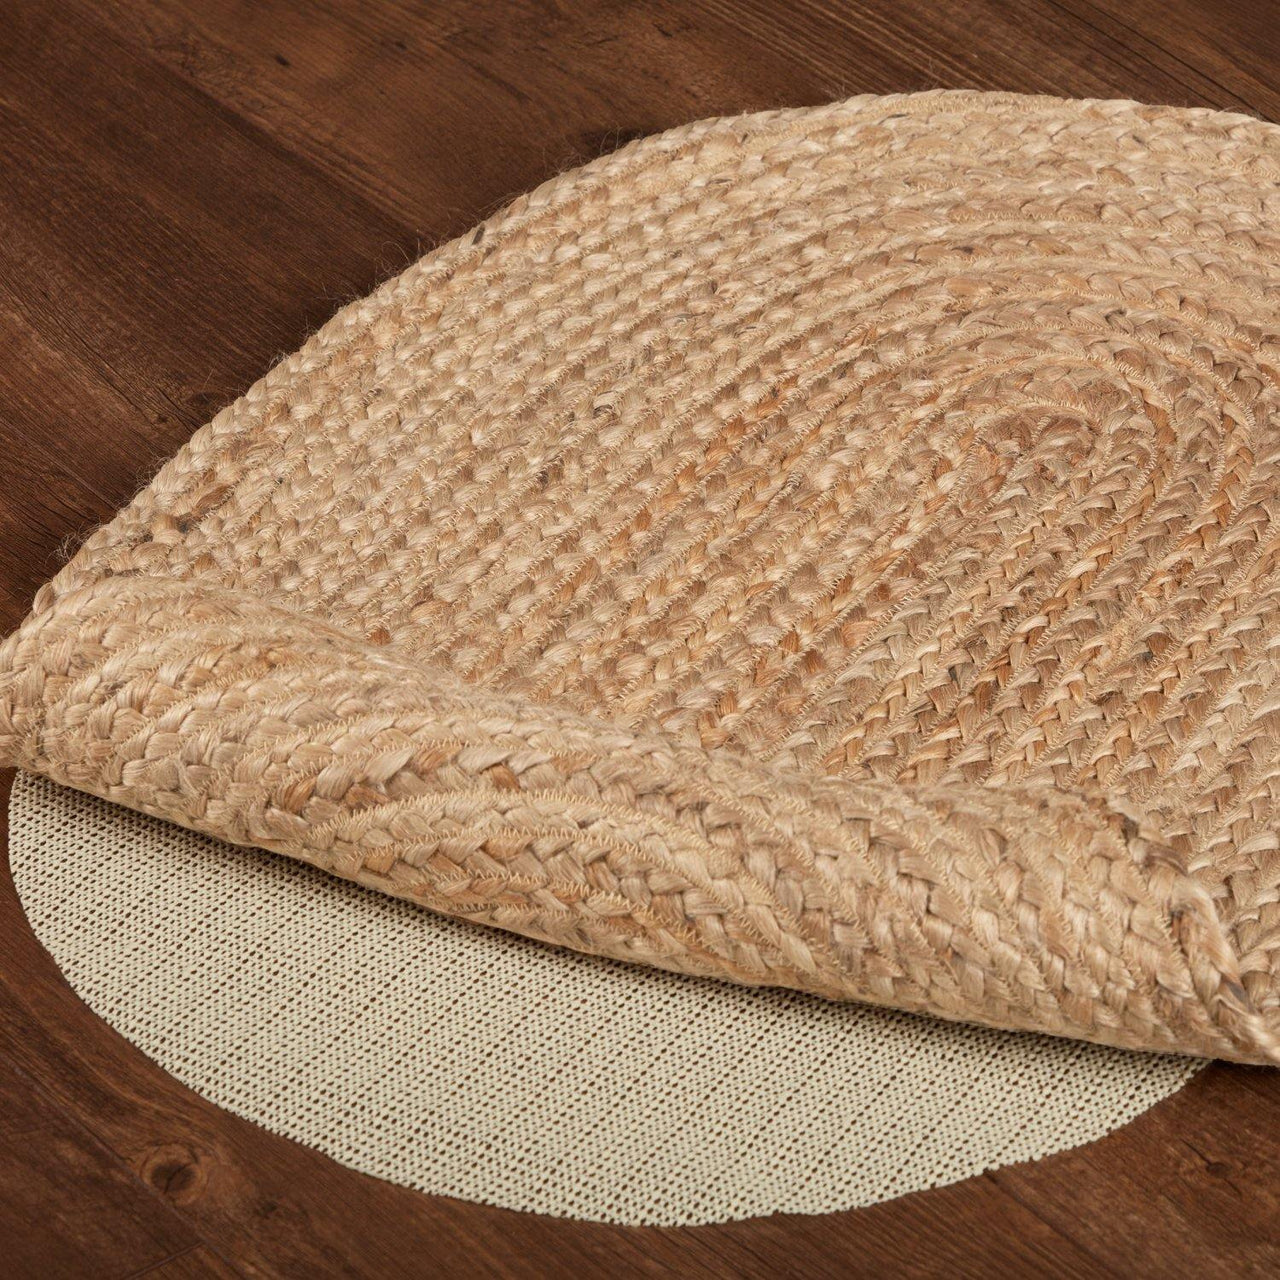 Natural Jute Braided Rug Oval 20"x30" with Rug Pad VHC Brands - The Fox Decor